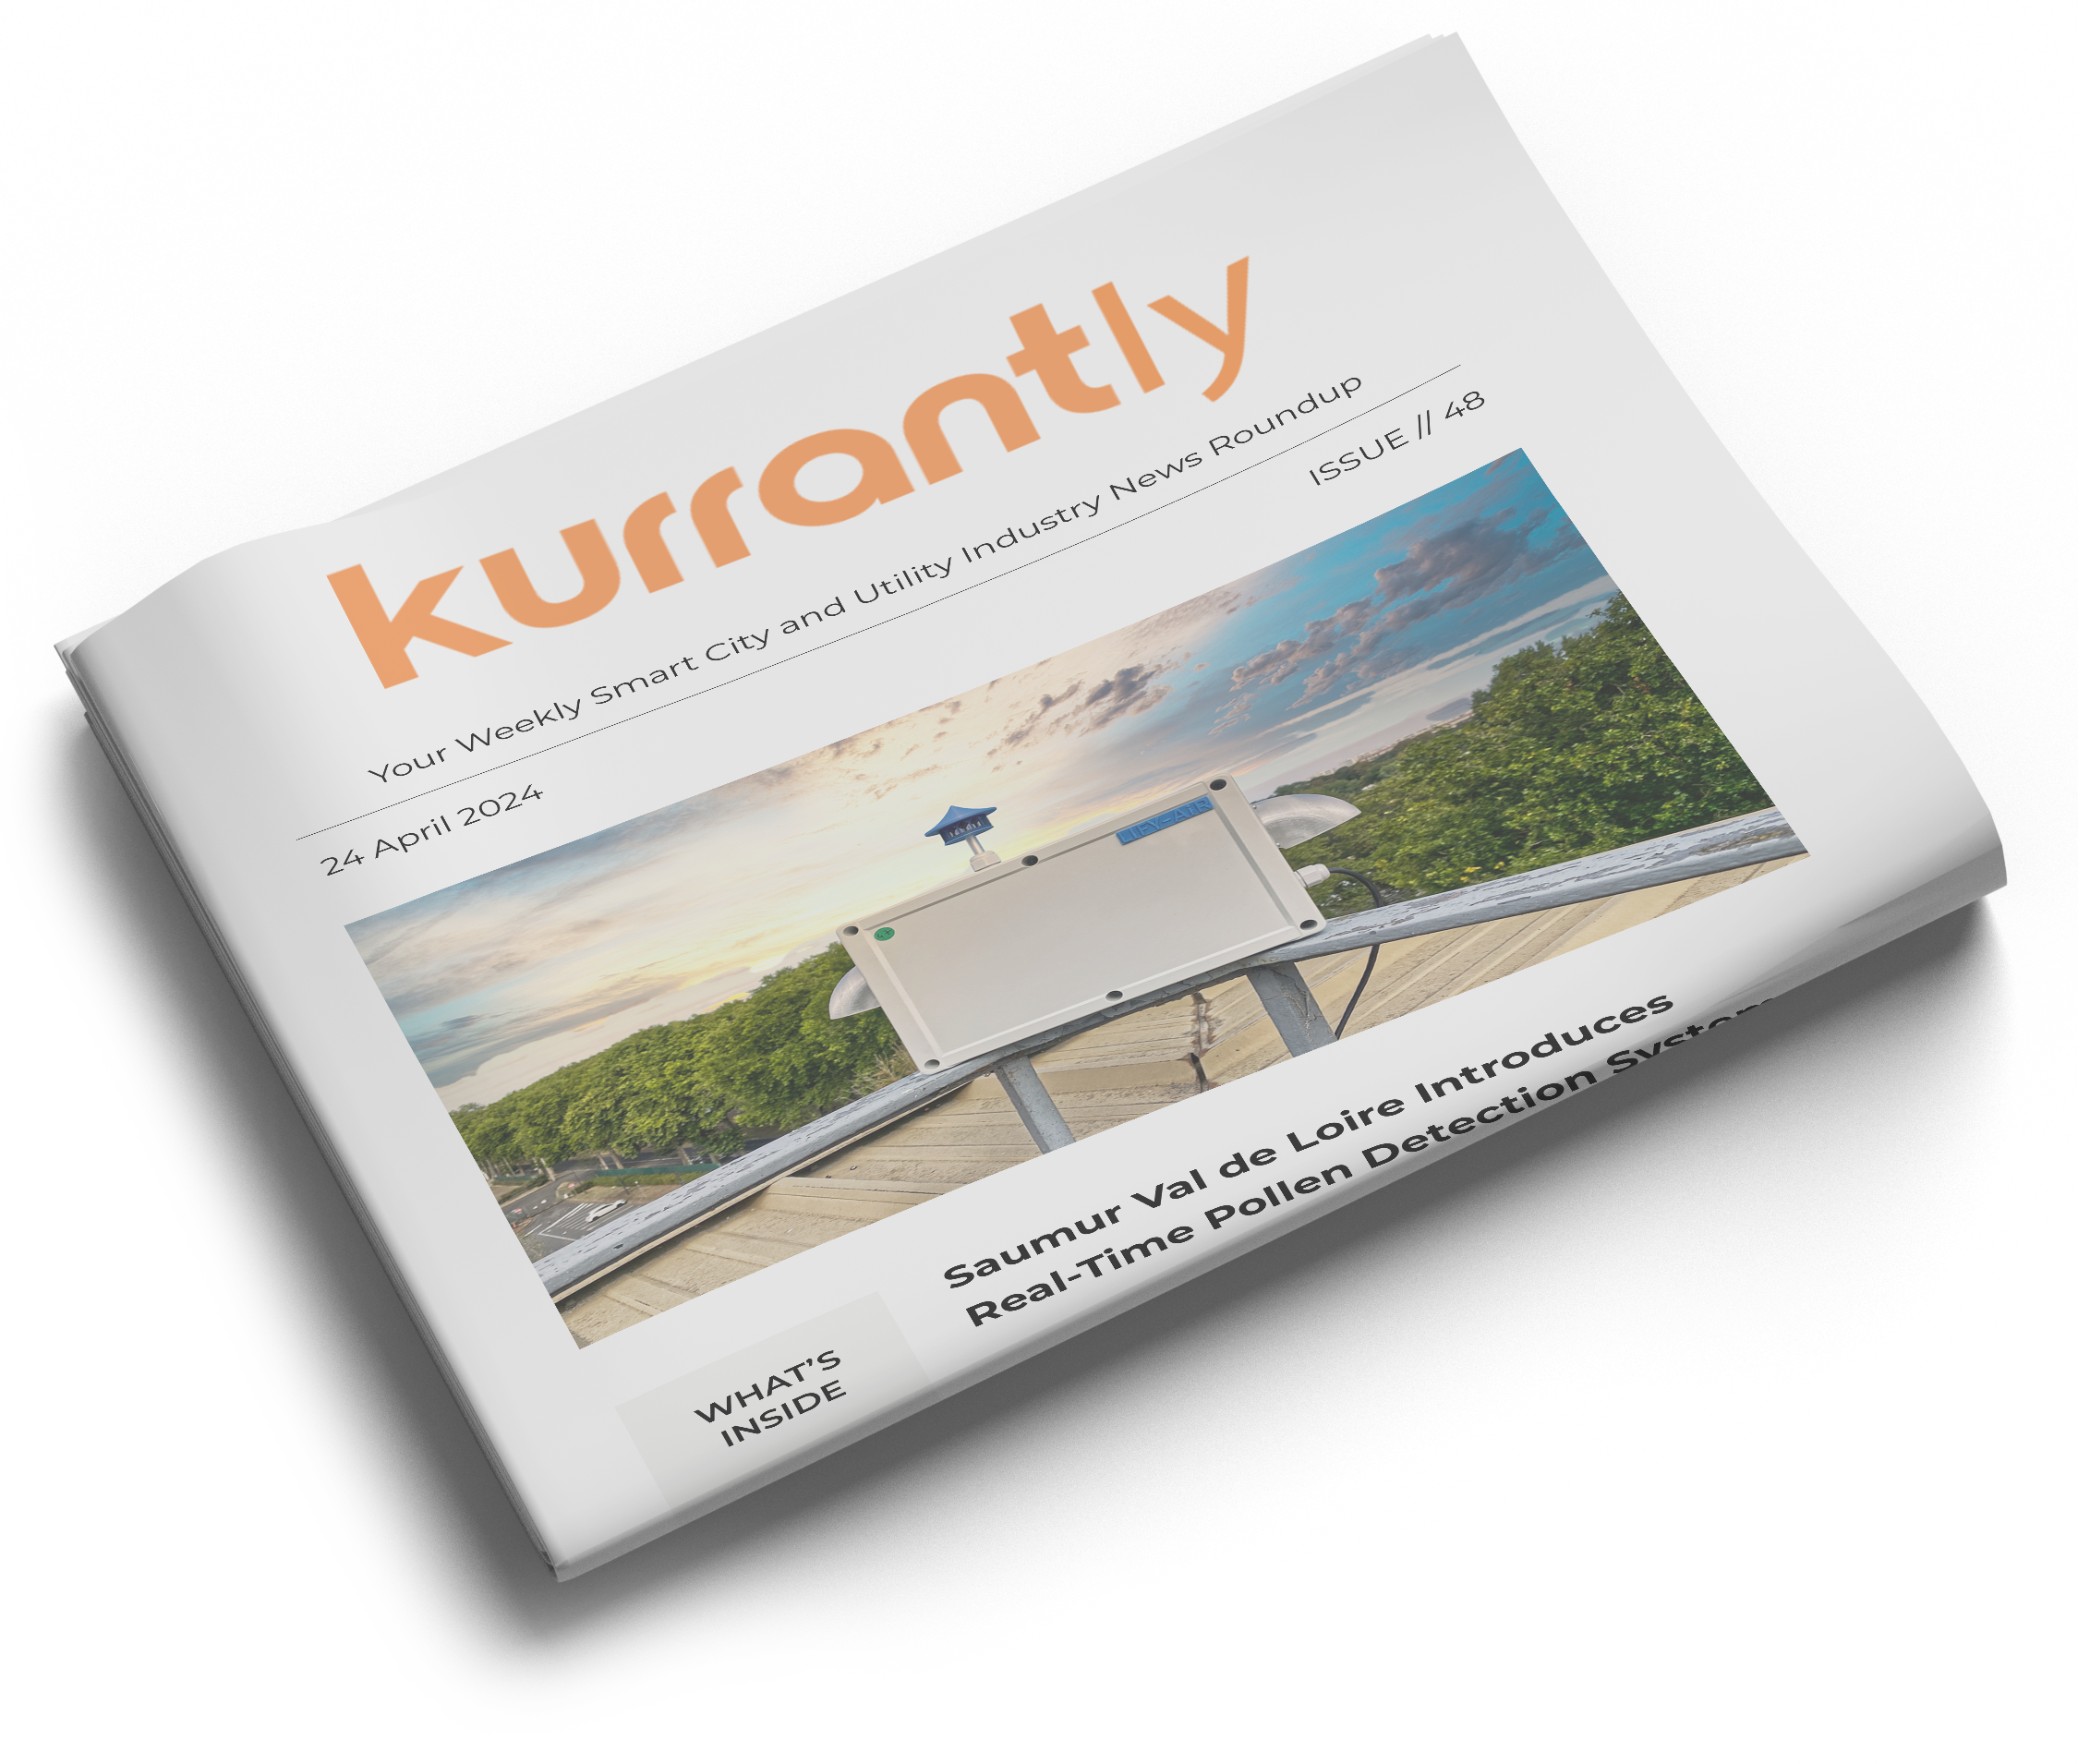 Kurrantly Smart City News of 24 April 2024 Cover